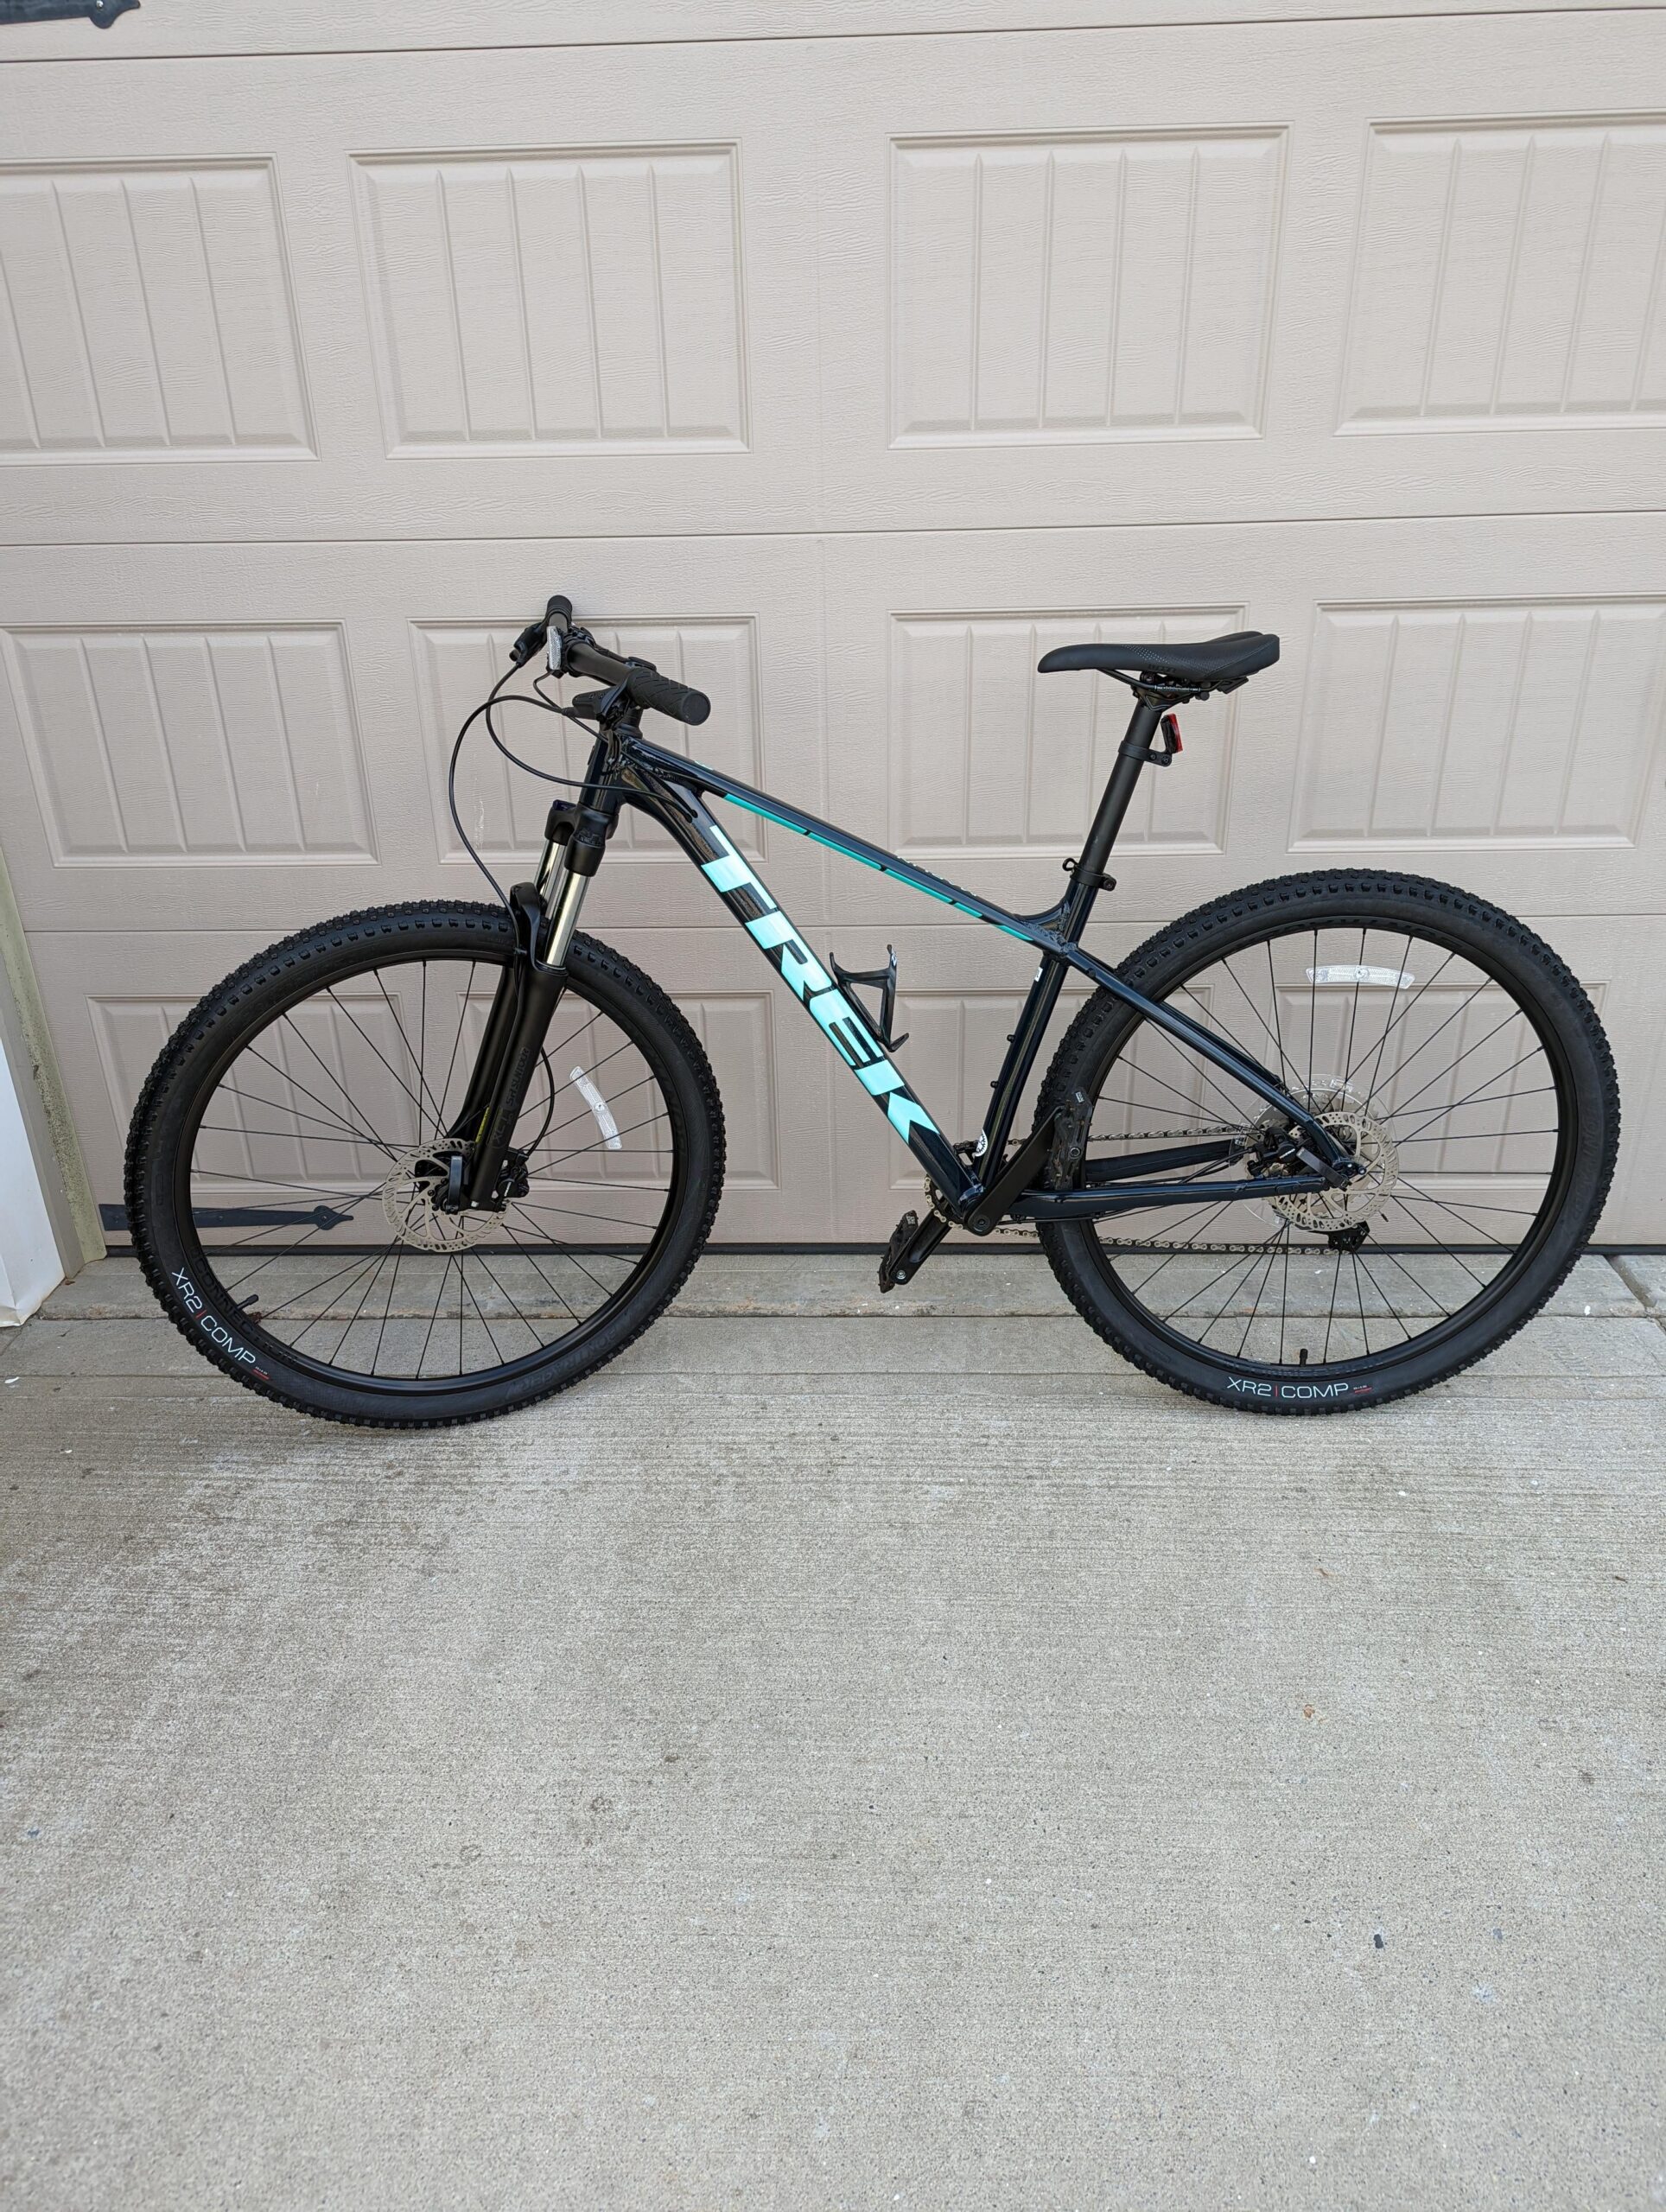 NBD! Excited as all hell to get back on the trails. Marlin 6 : mountainbiking